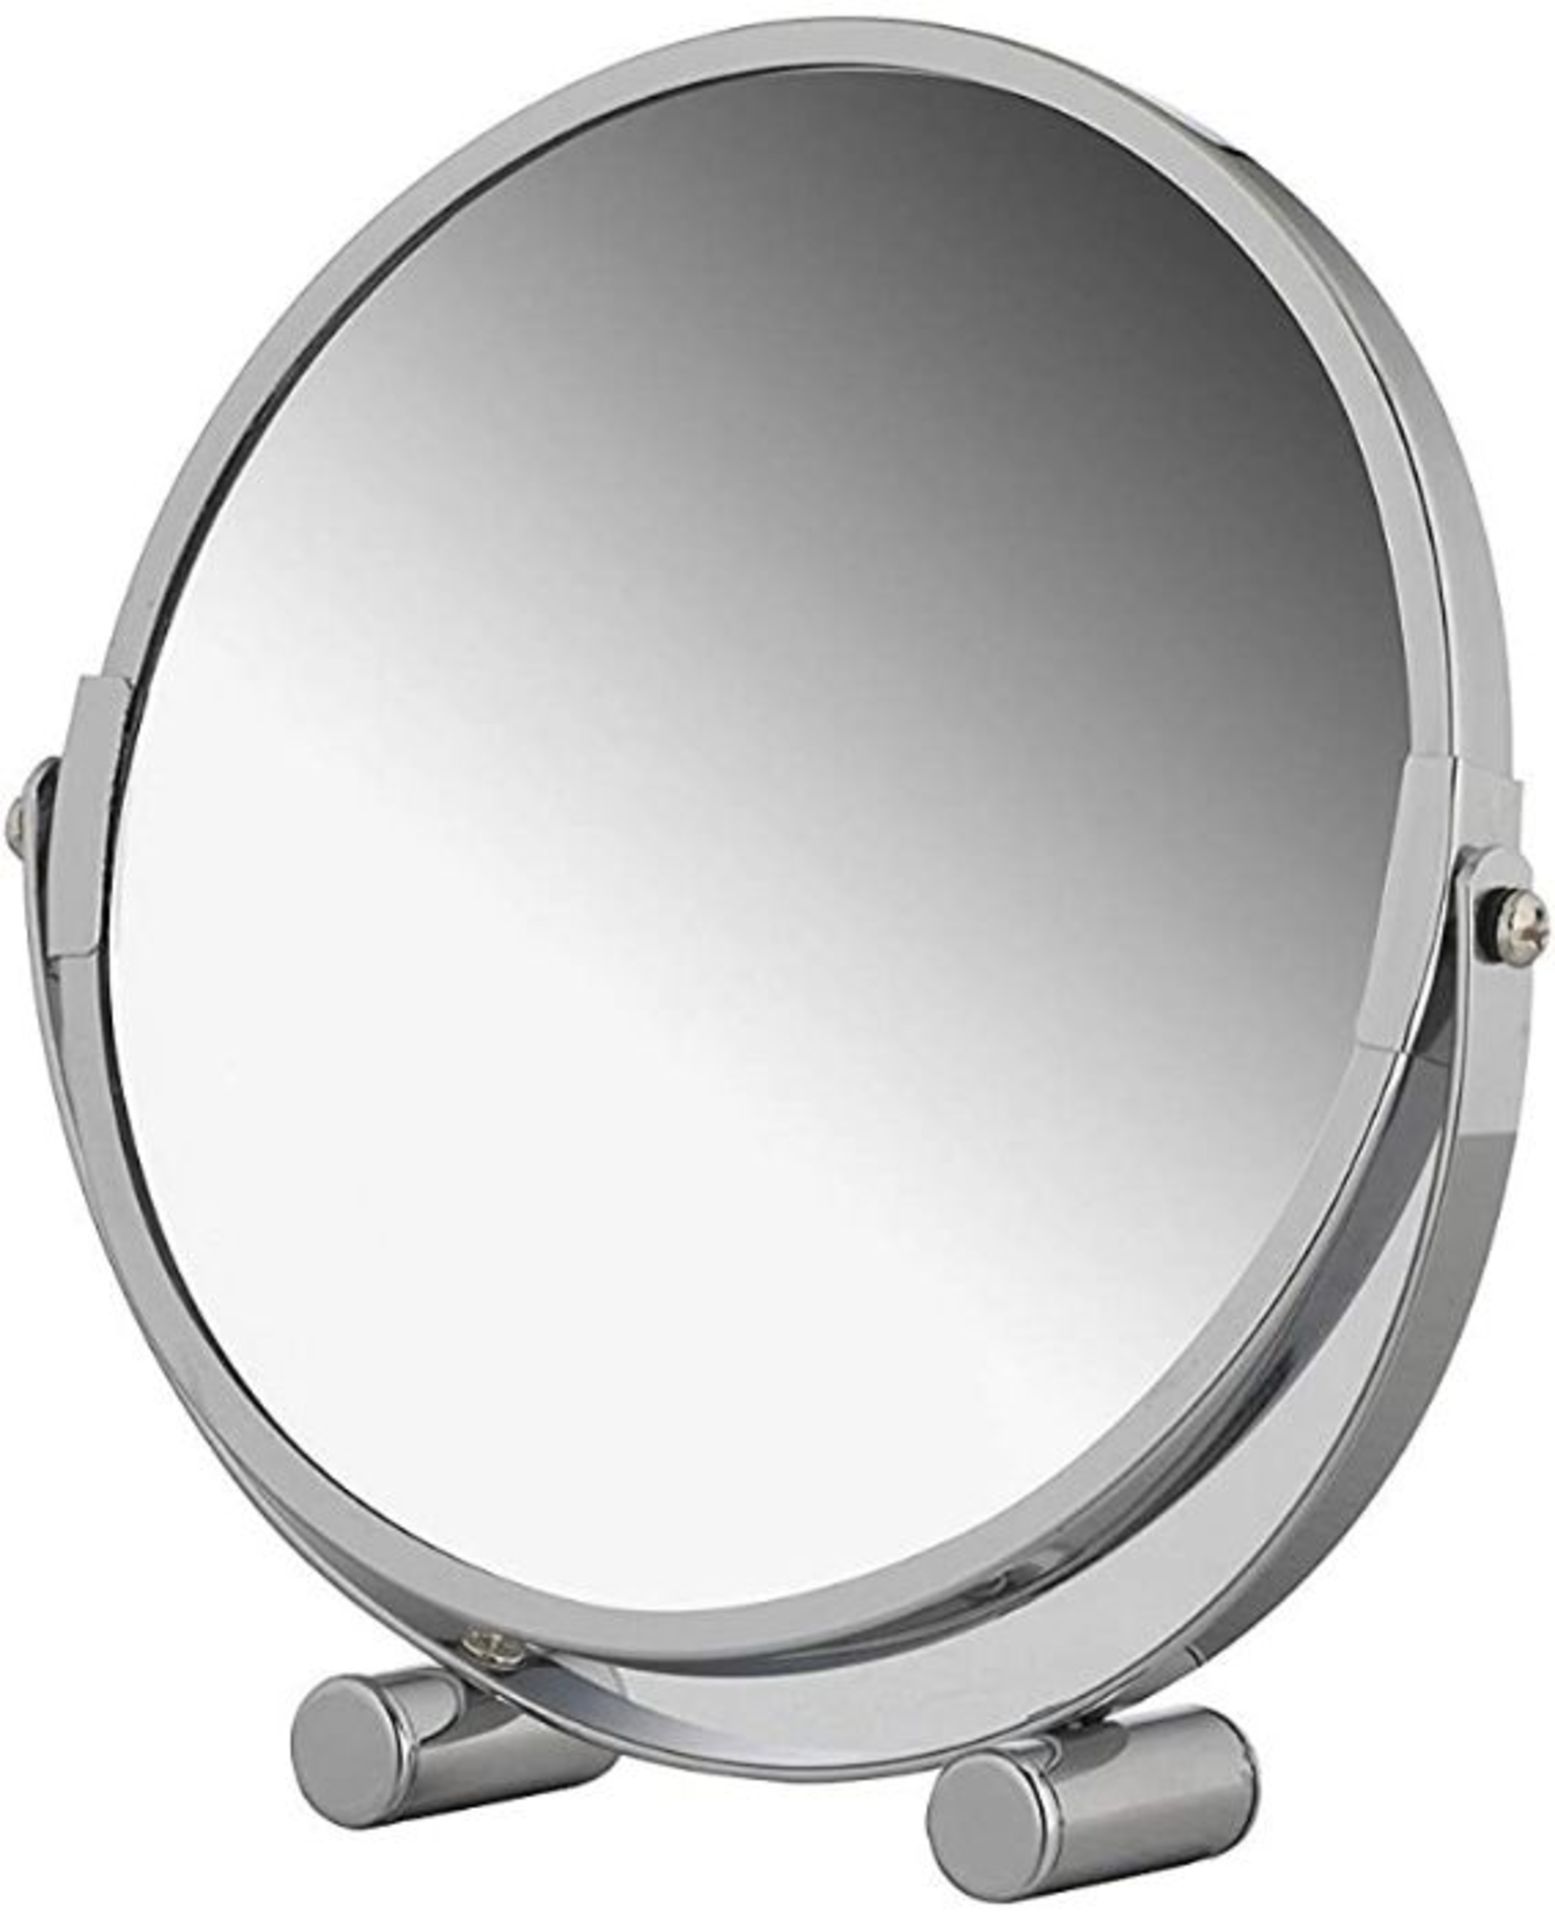 axentia Free Standing Swivel Magnifying Mirror, Portable Chromed Metal Cosmetic Vanity Mirror with - Image 2 of 2